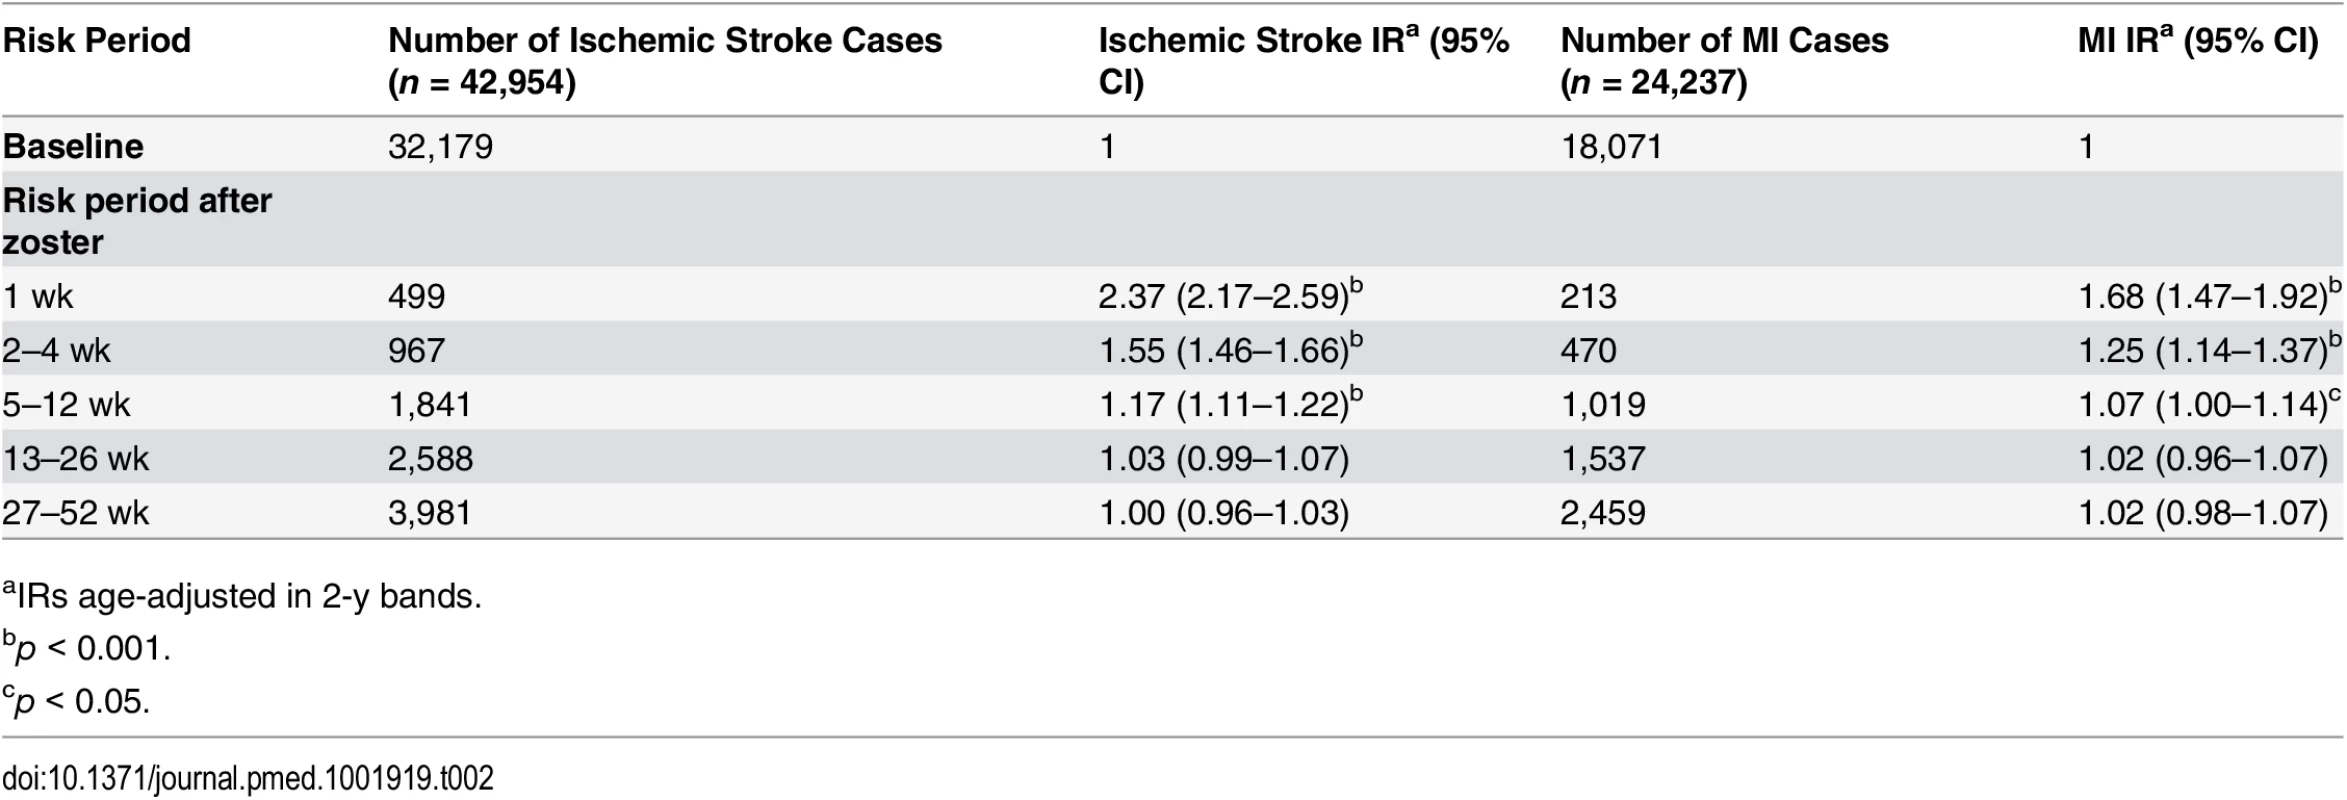 Primary analysis: age-adjusted incidence ratios for ischemic stroke and myocardial infarction in risk periods after zoster diagnosis.